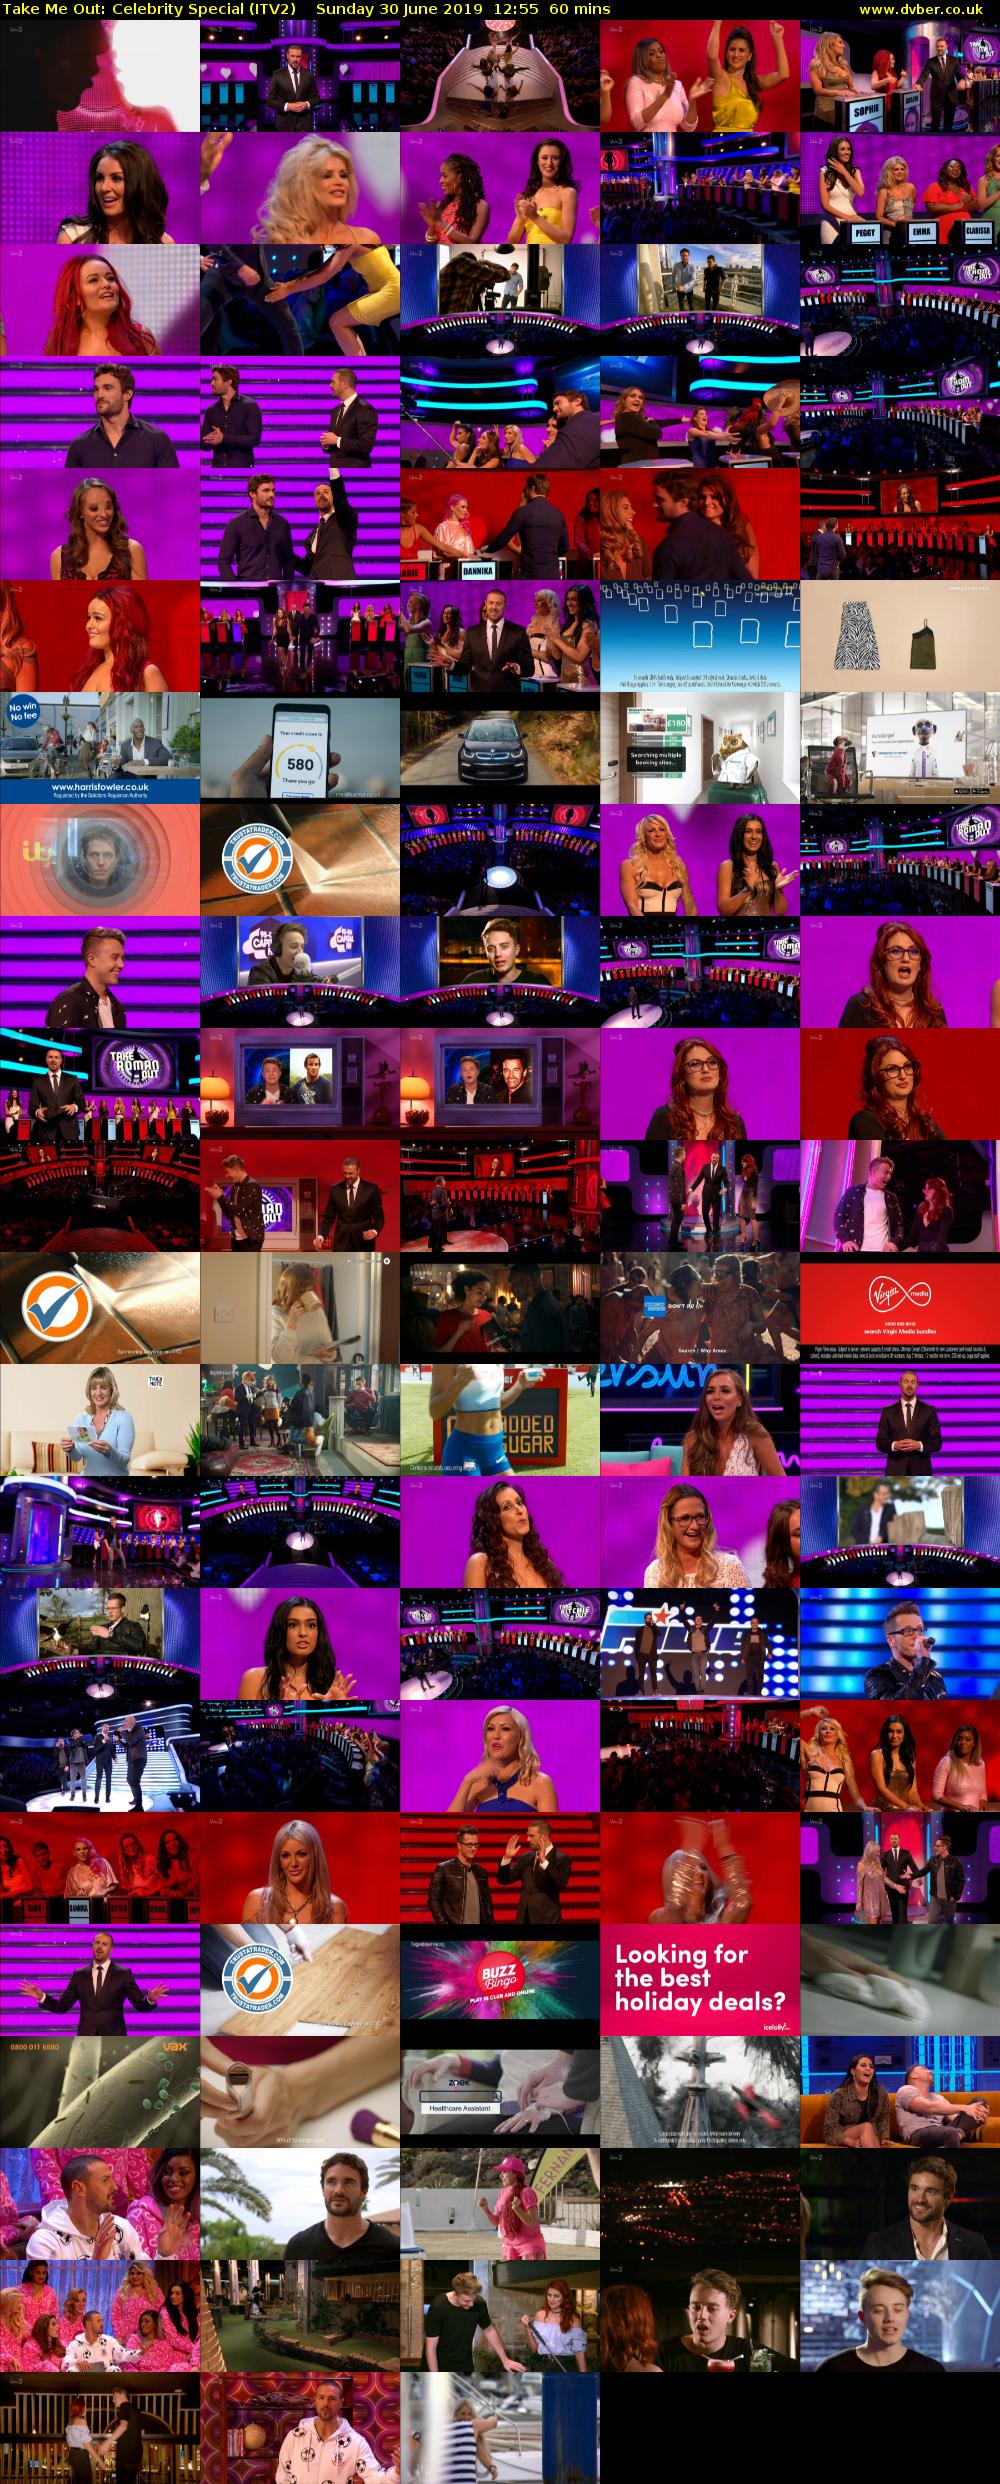 Take Me Out: Celebrity Special (ITV2) Sunday 30 June 2019 12:55 - 13:55